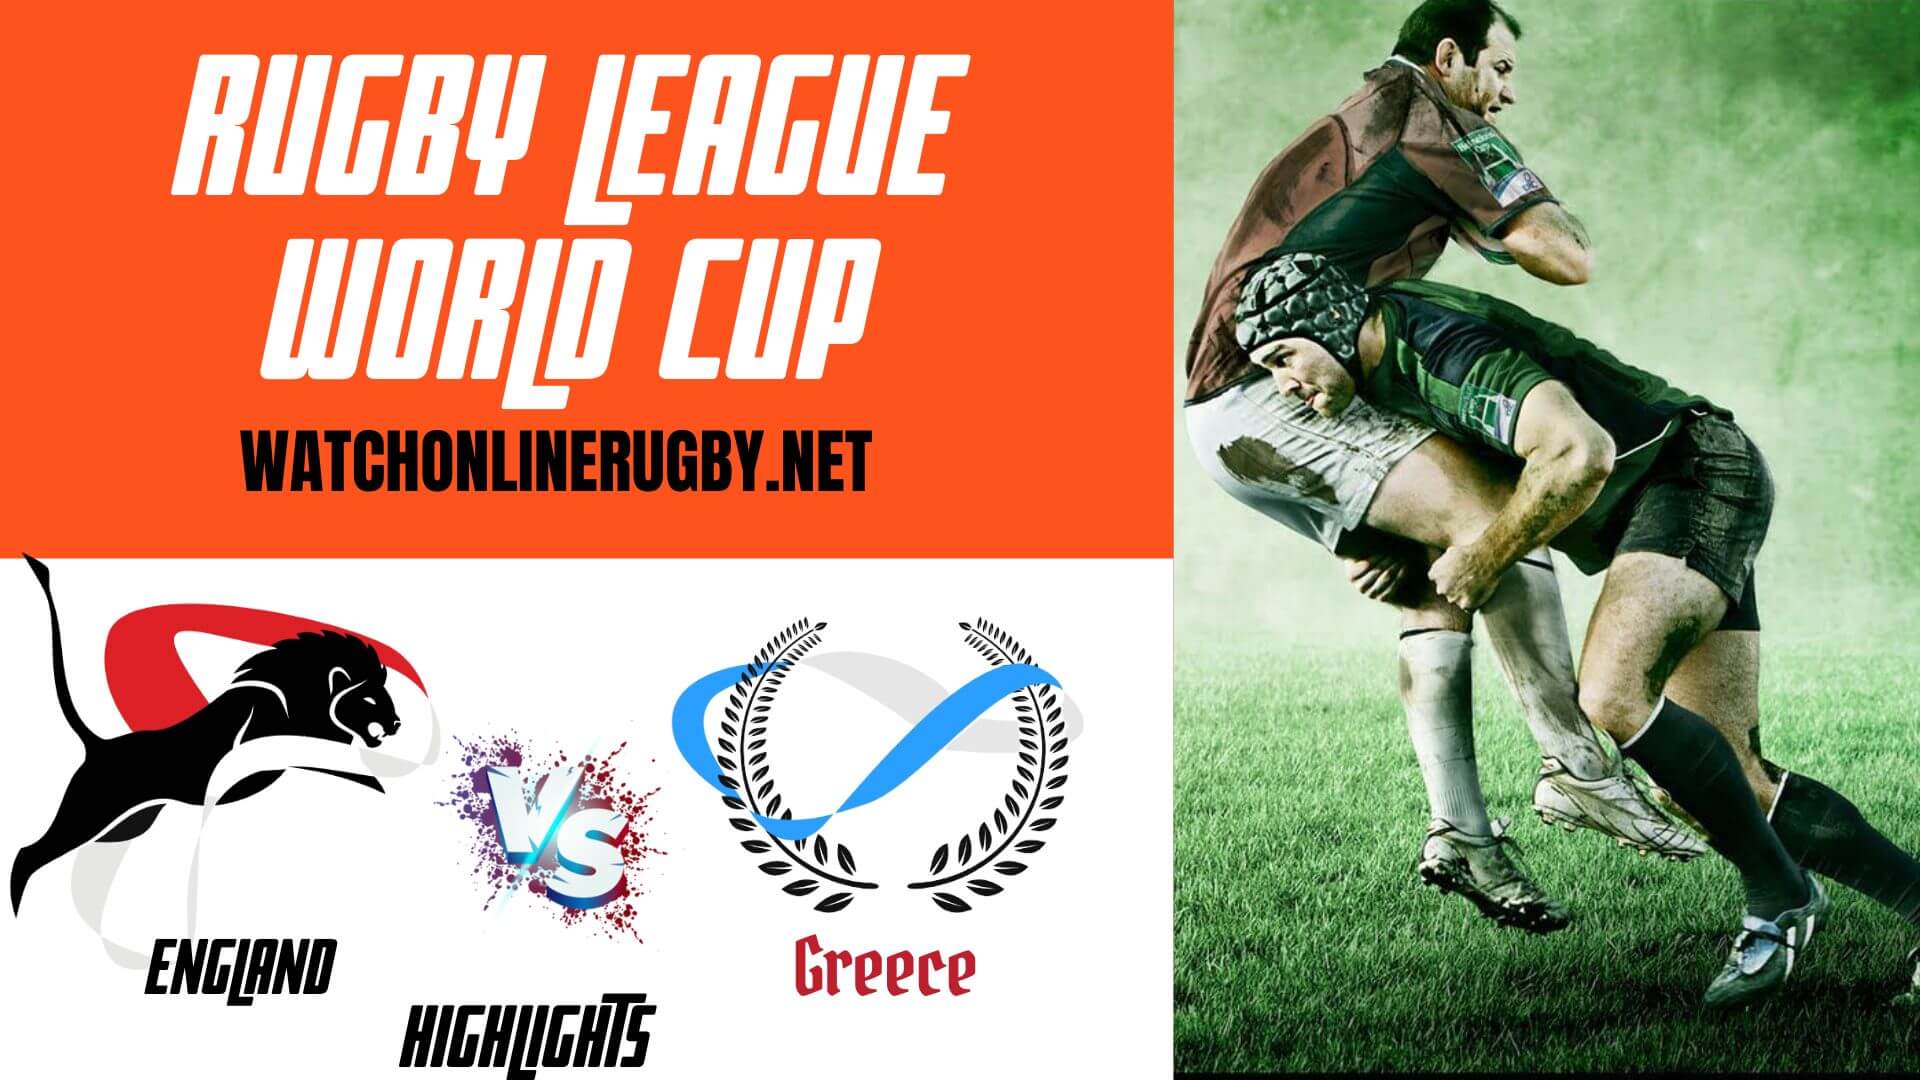 England Vs Greece Rugby League World Cup 2022 RD 3